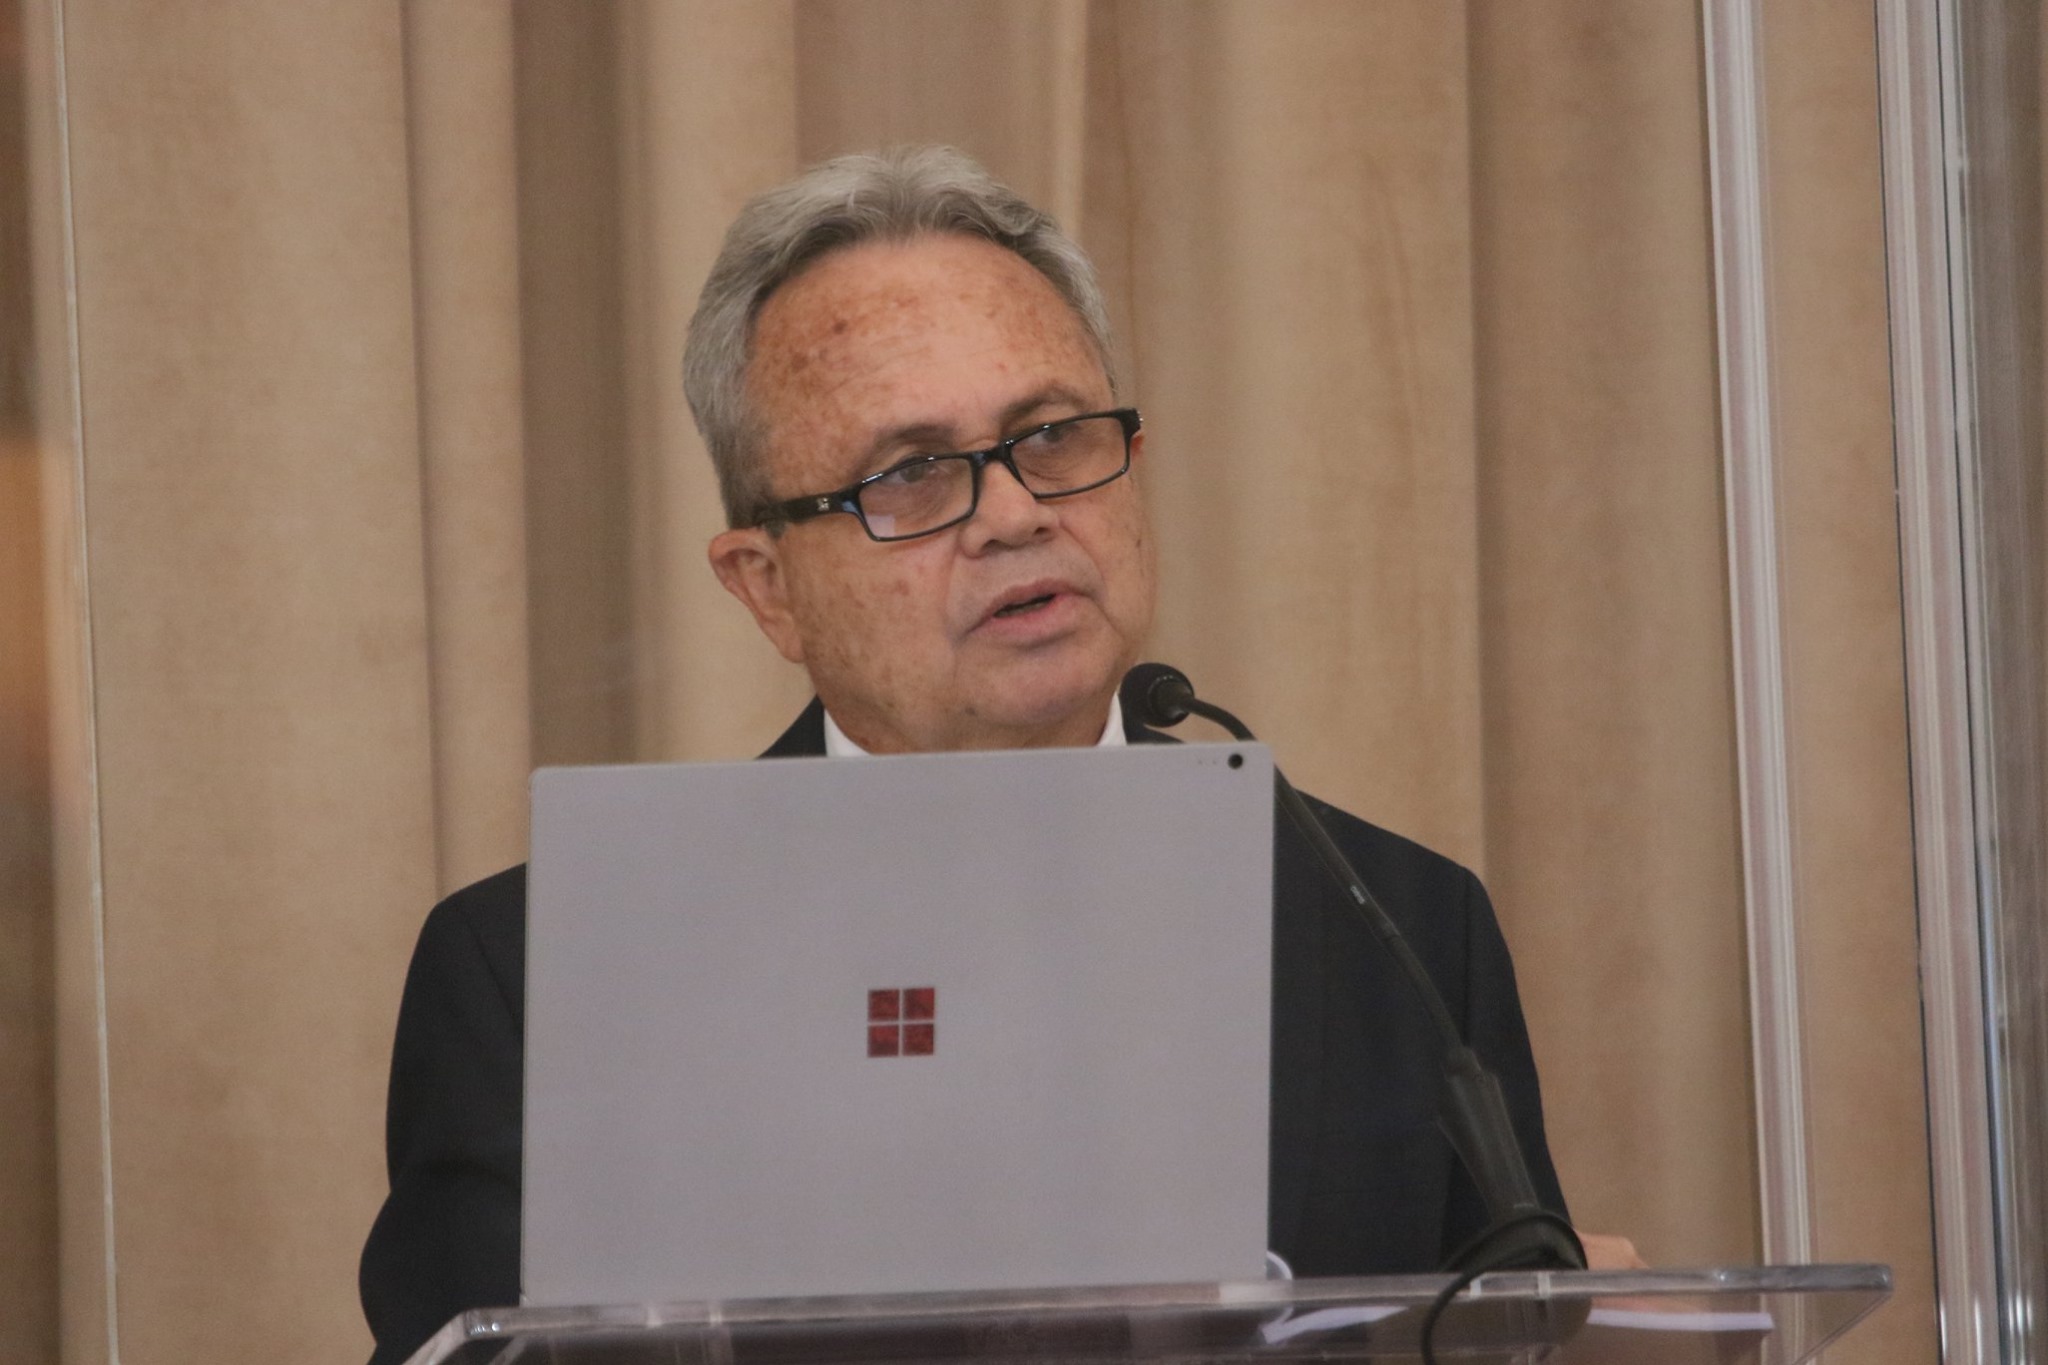 Imbert: Government will not hesitate to amend legislation if fuel dealers engage in price gouging